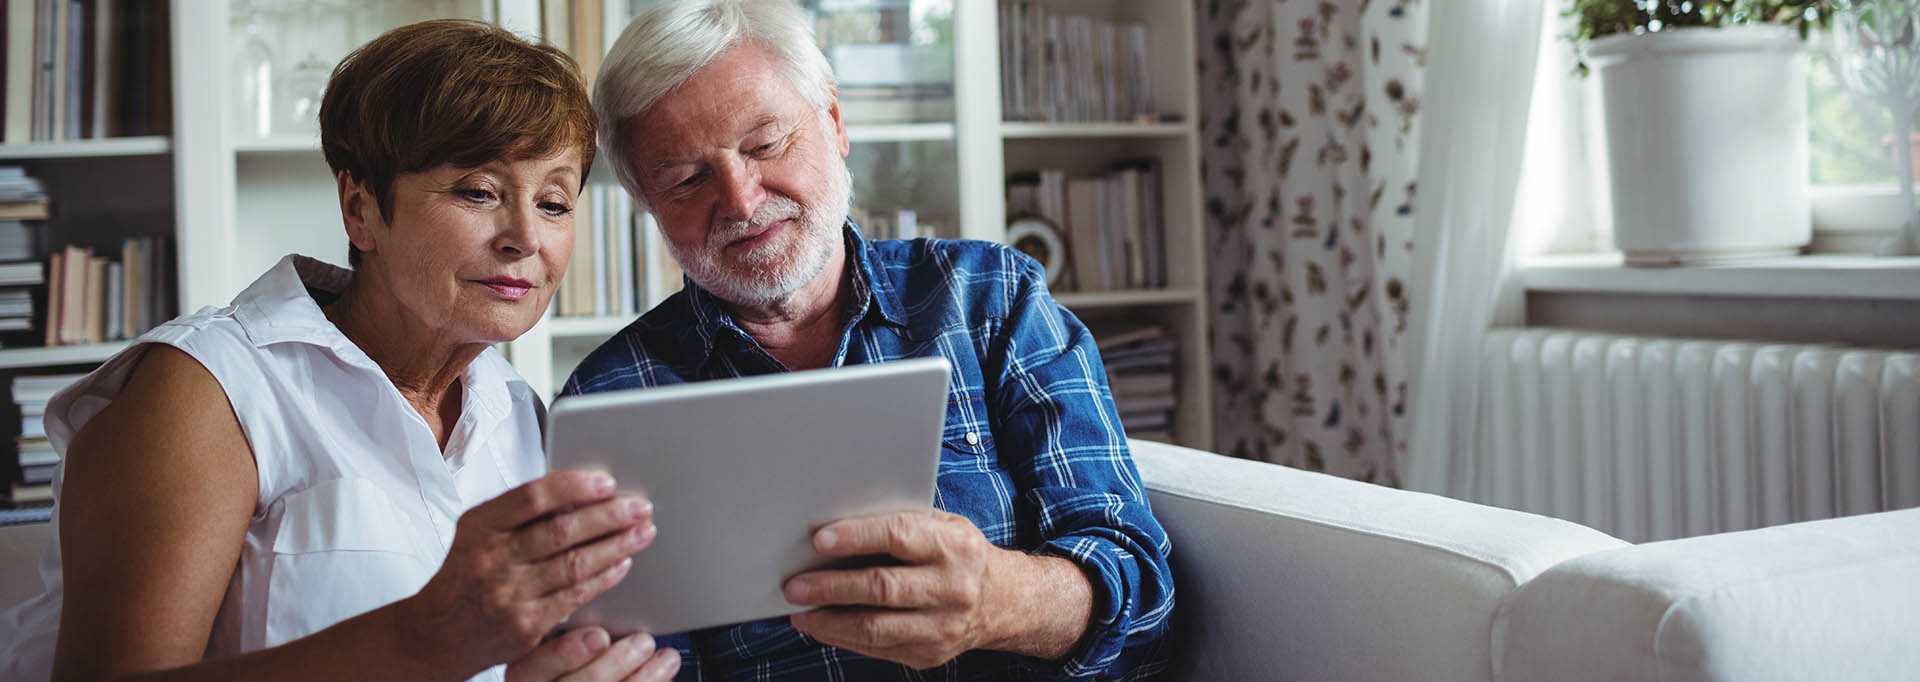 An older couple searching for care options on a tablet